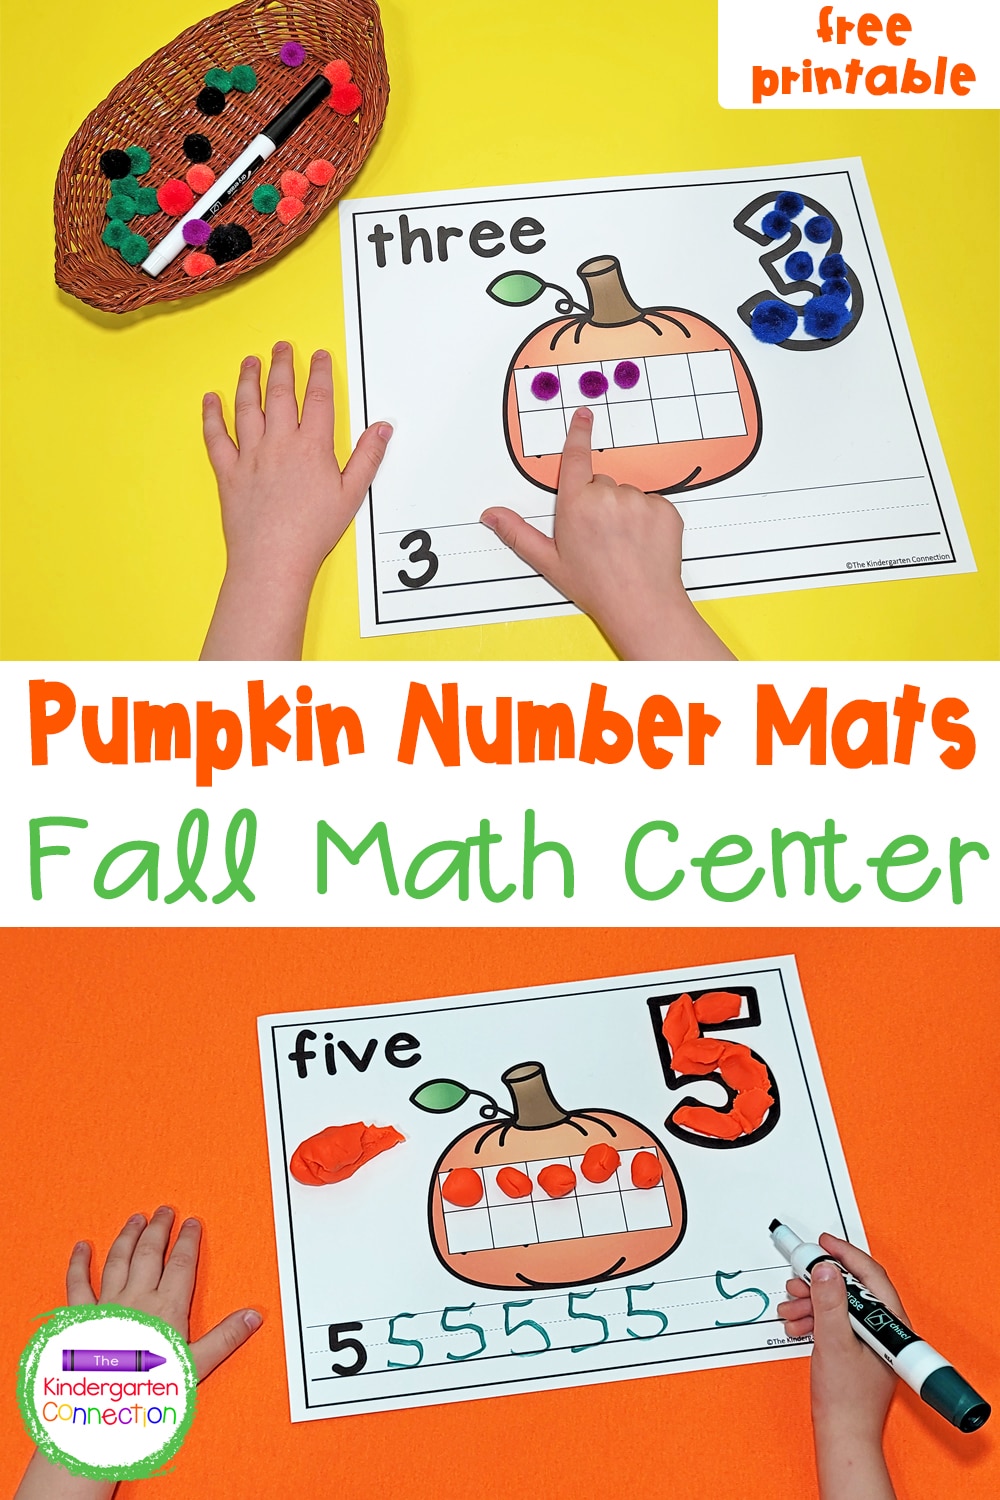 Ready for some fall-themed math fun? Practice counting and number formation with these free Pumpkin Number Mats!